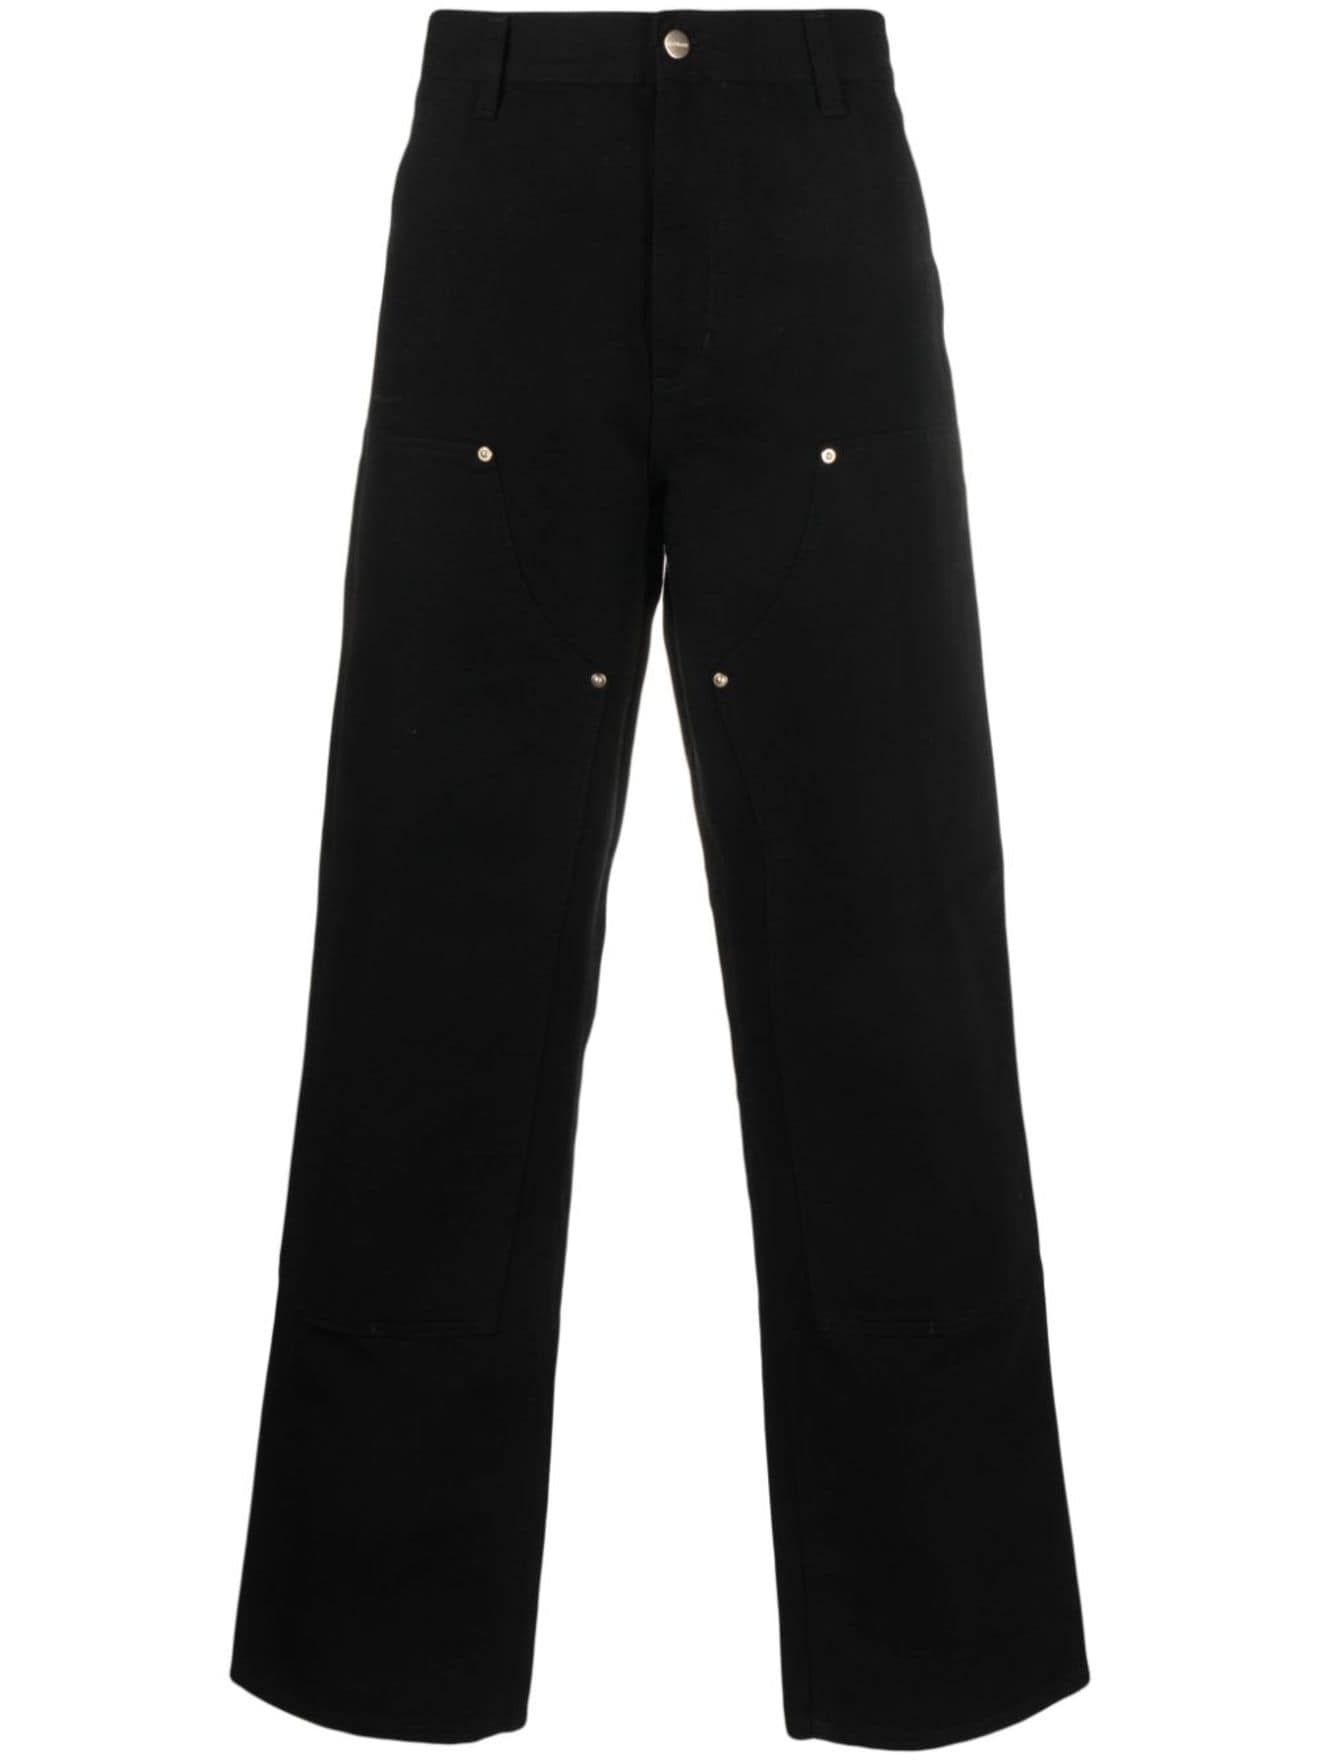 Carhartt WIP Double Knee panelled straight-leg trousers black | MODES